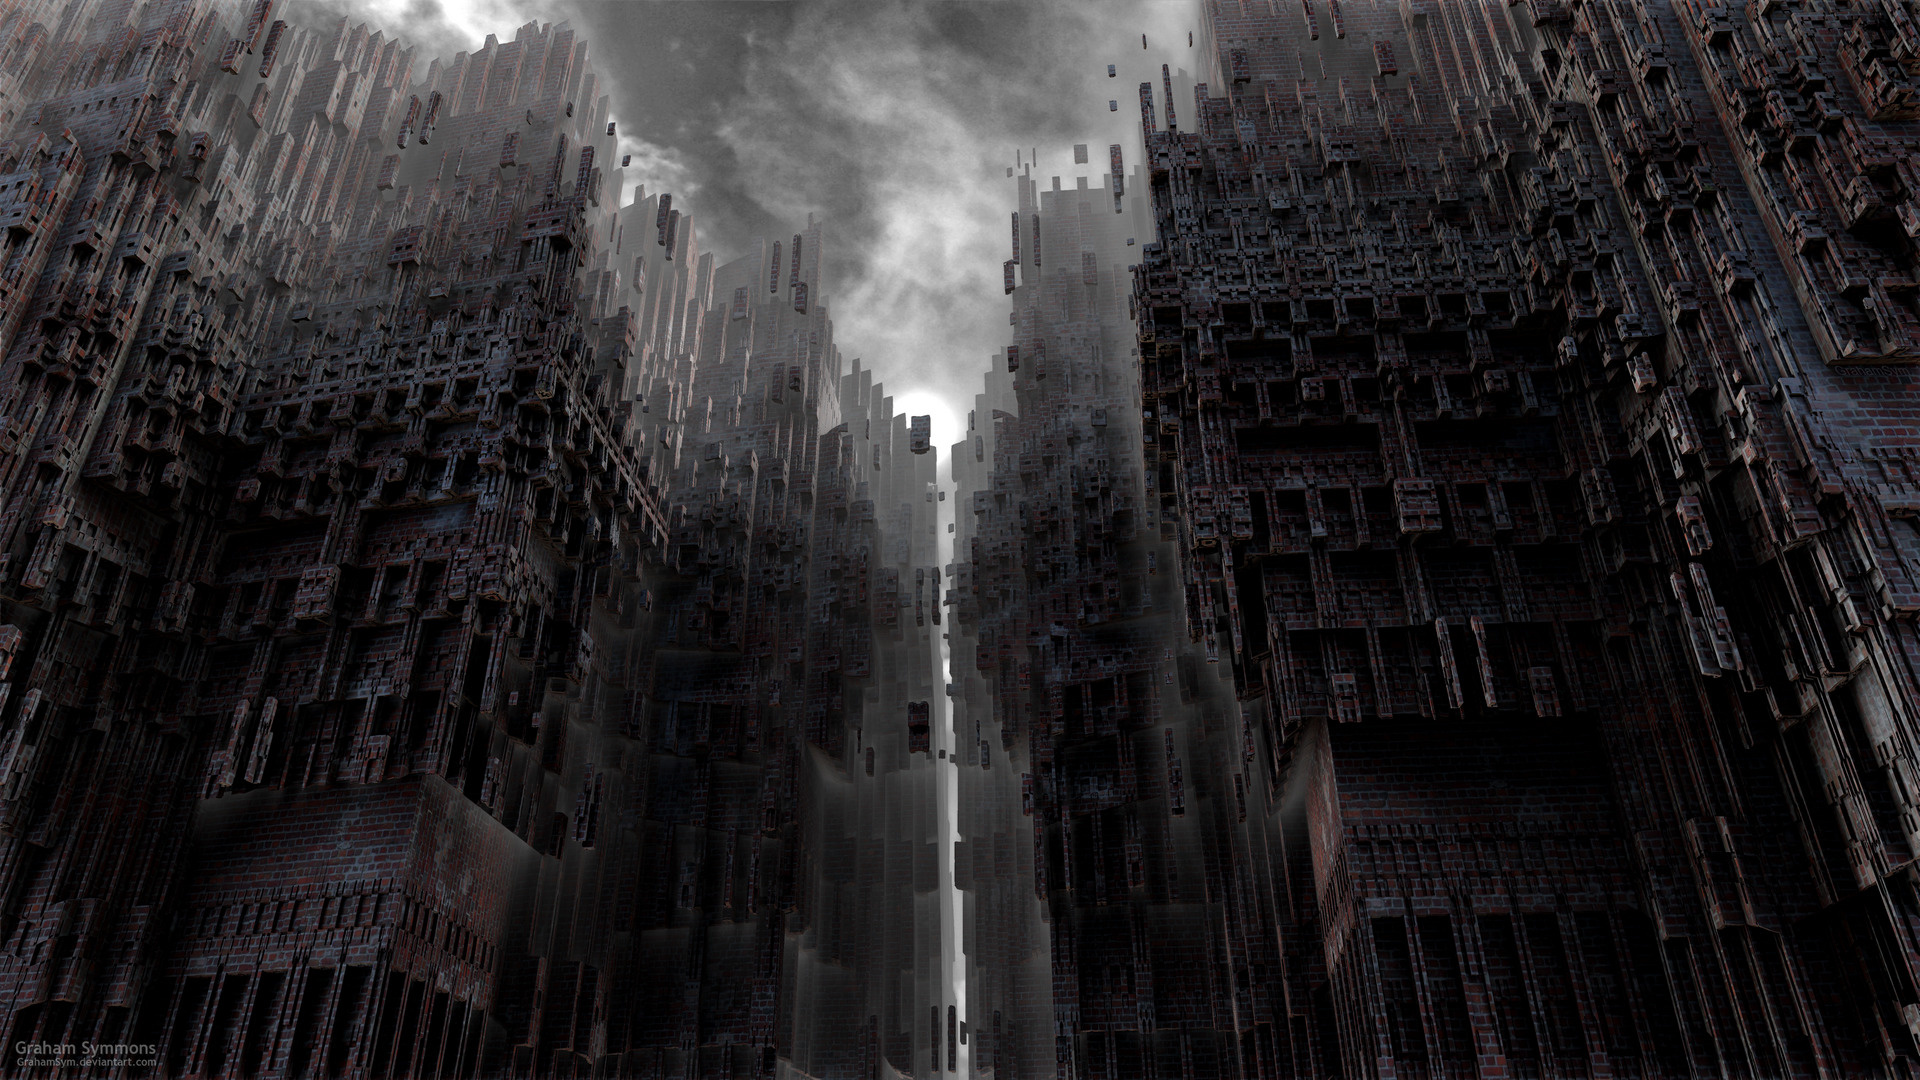 Gothic Art: Digital abstract architecture, A gray gloomy world, Supernatural landscape. 1920x1080 Full HD Wallpaper.